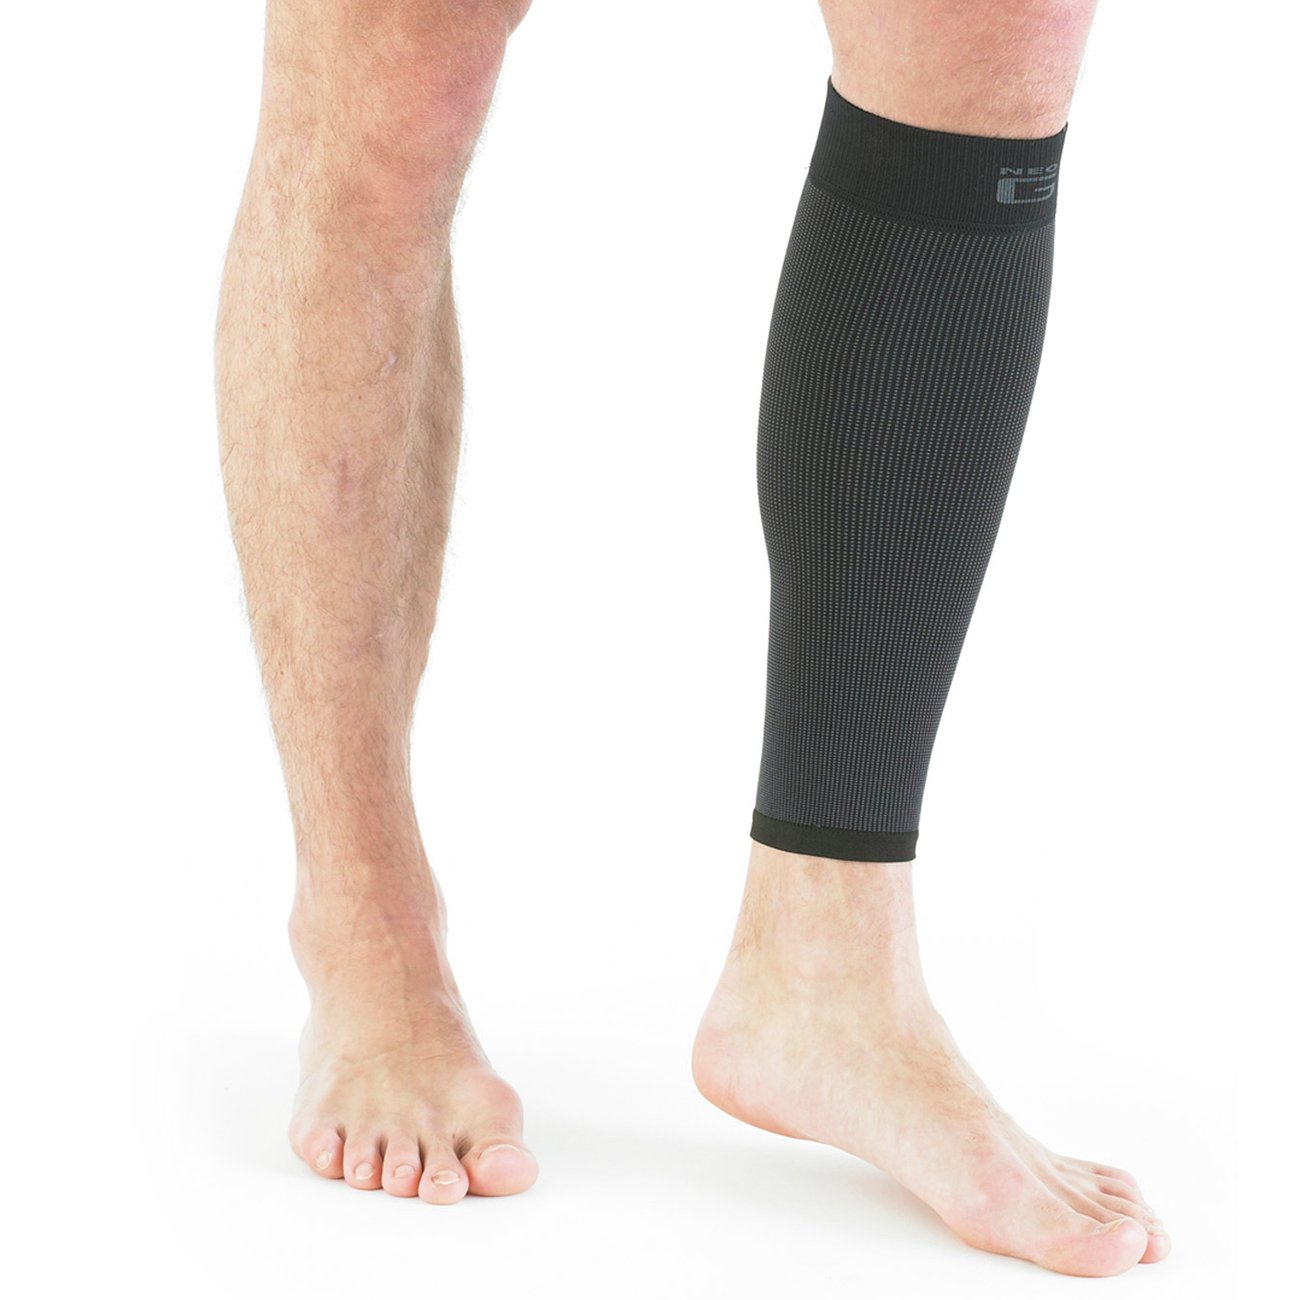 Neo G Airflow Calf Support - Large